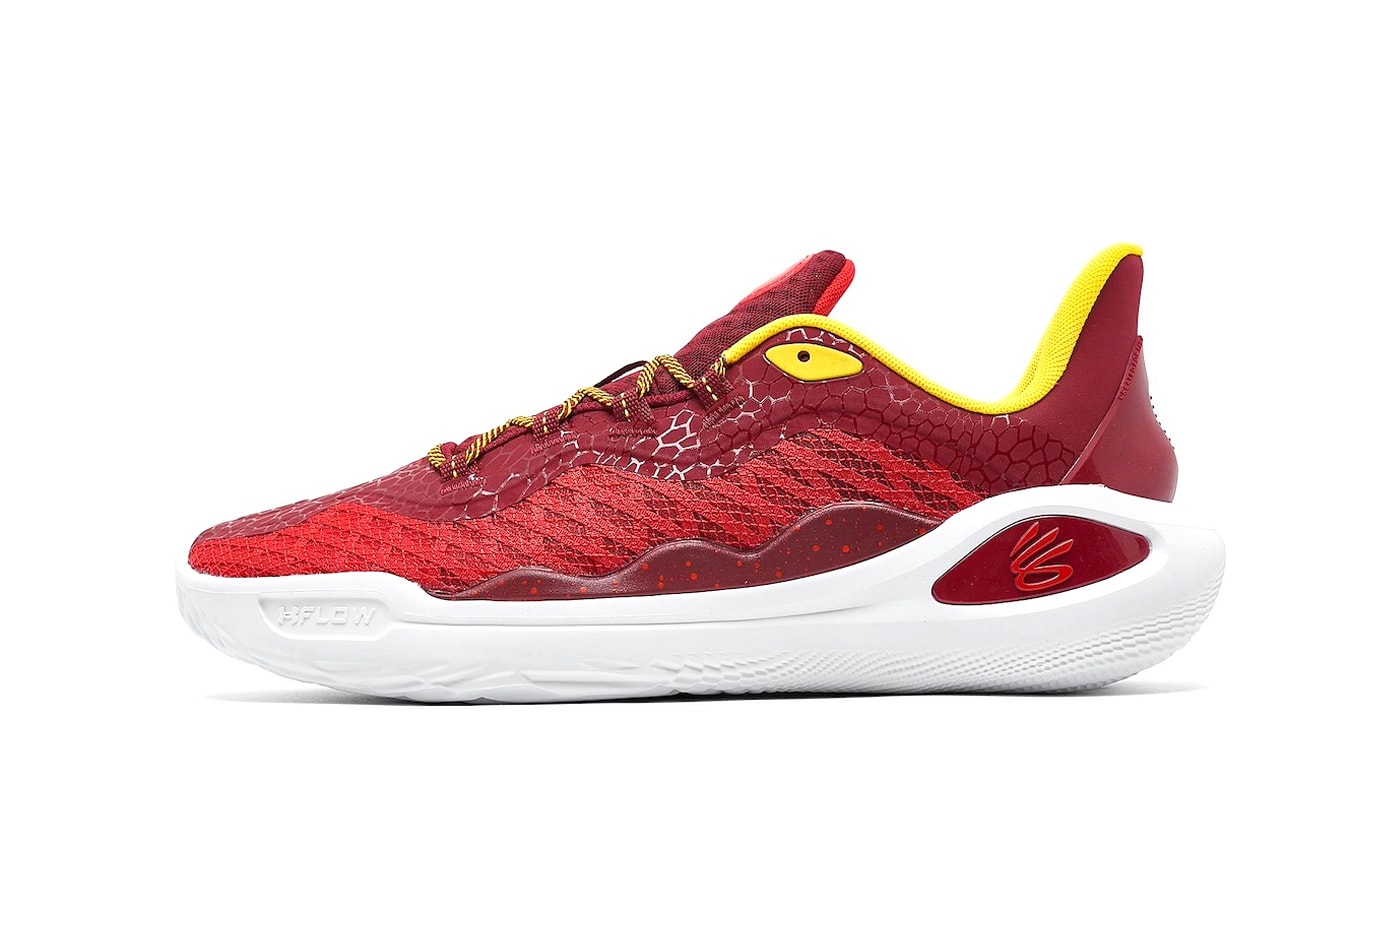 Under Armour Curry 11 "Bruce Lee Fire" 3026618-600 Red/Cardinal-Red steph curry stephen gsw golden state warriors nba basketball